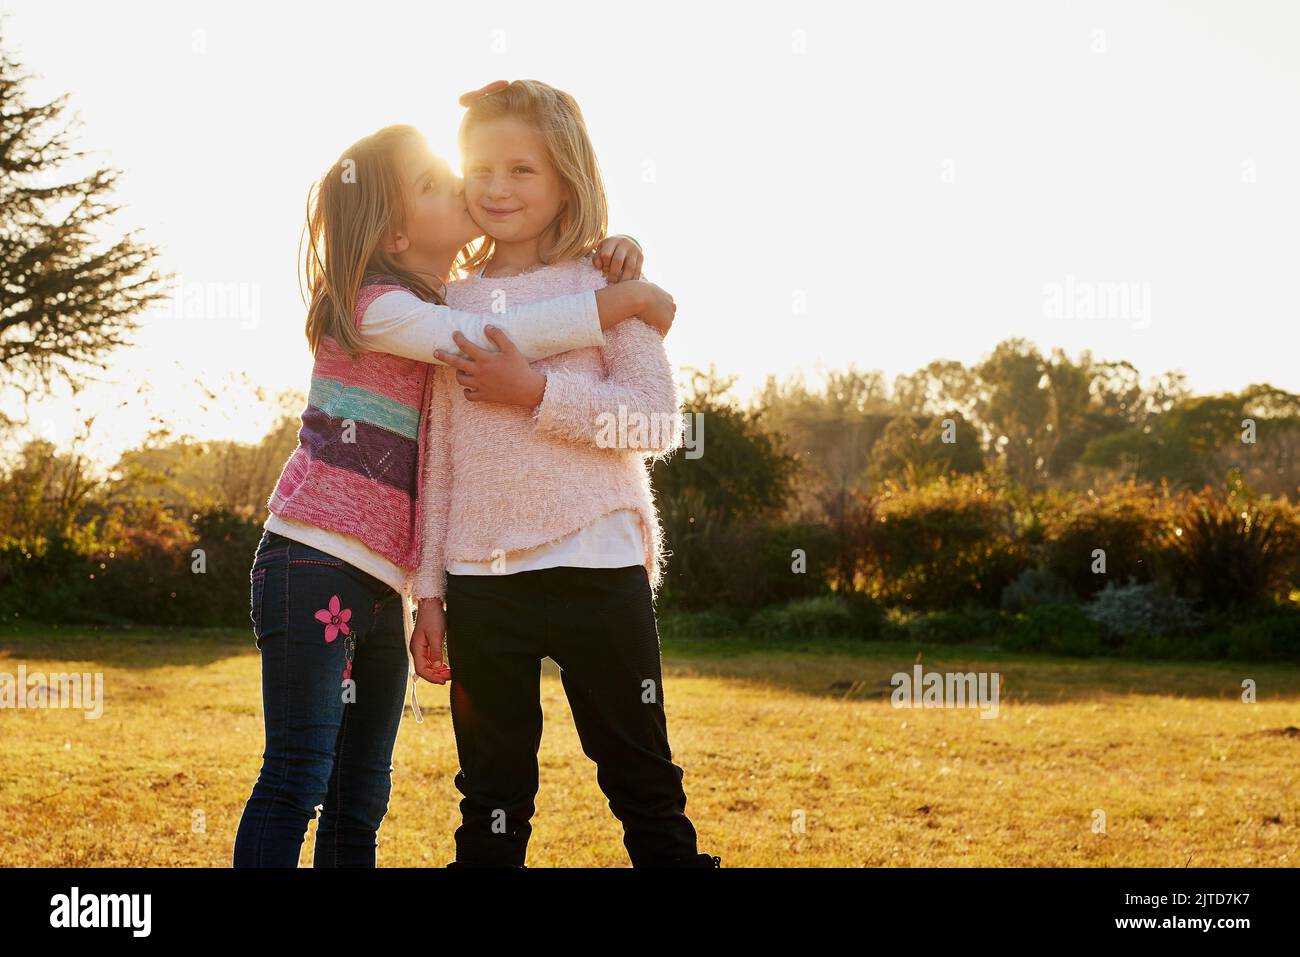 Its a friendship theyll continue long into their future. Portrait of two little girls having fun outside. Stock Photo